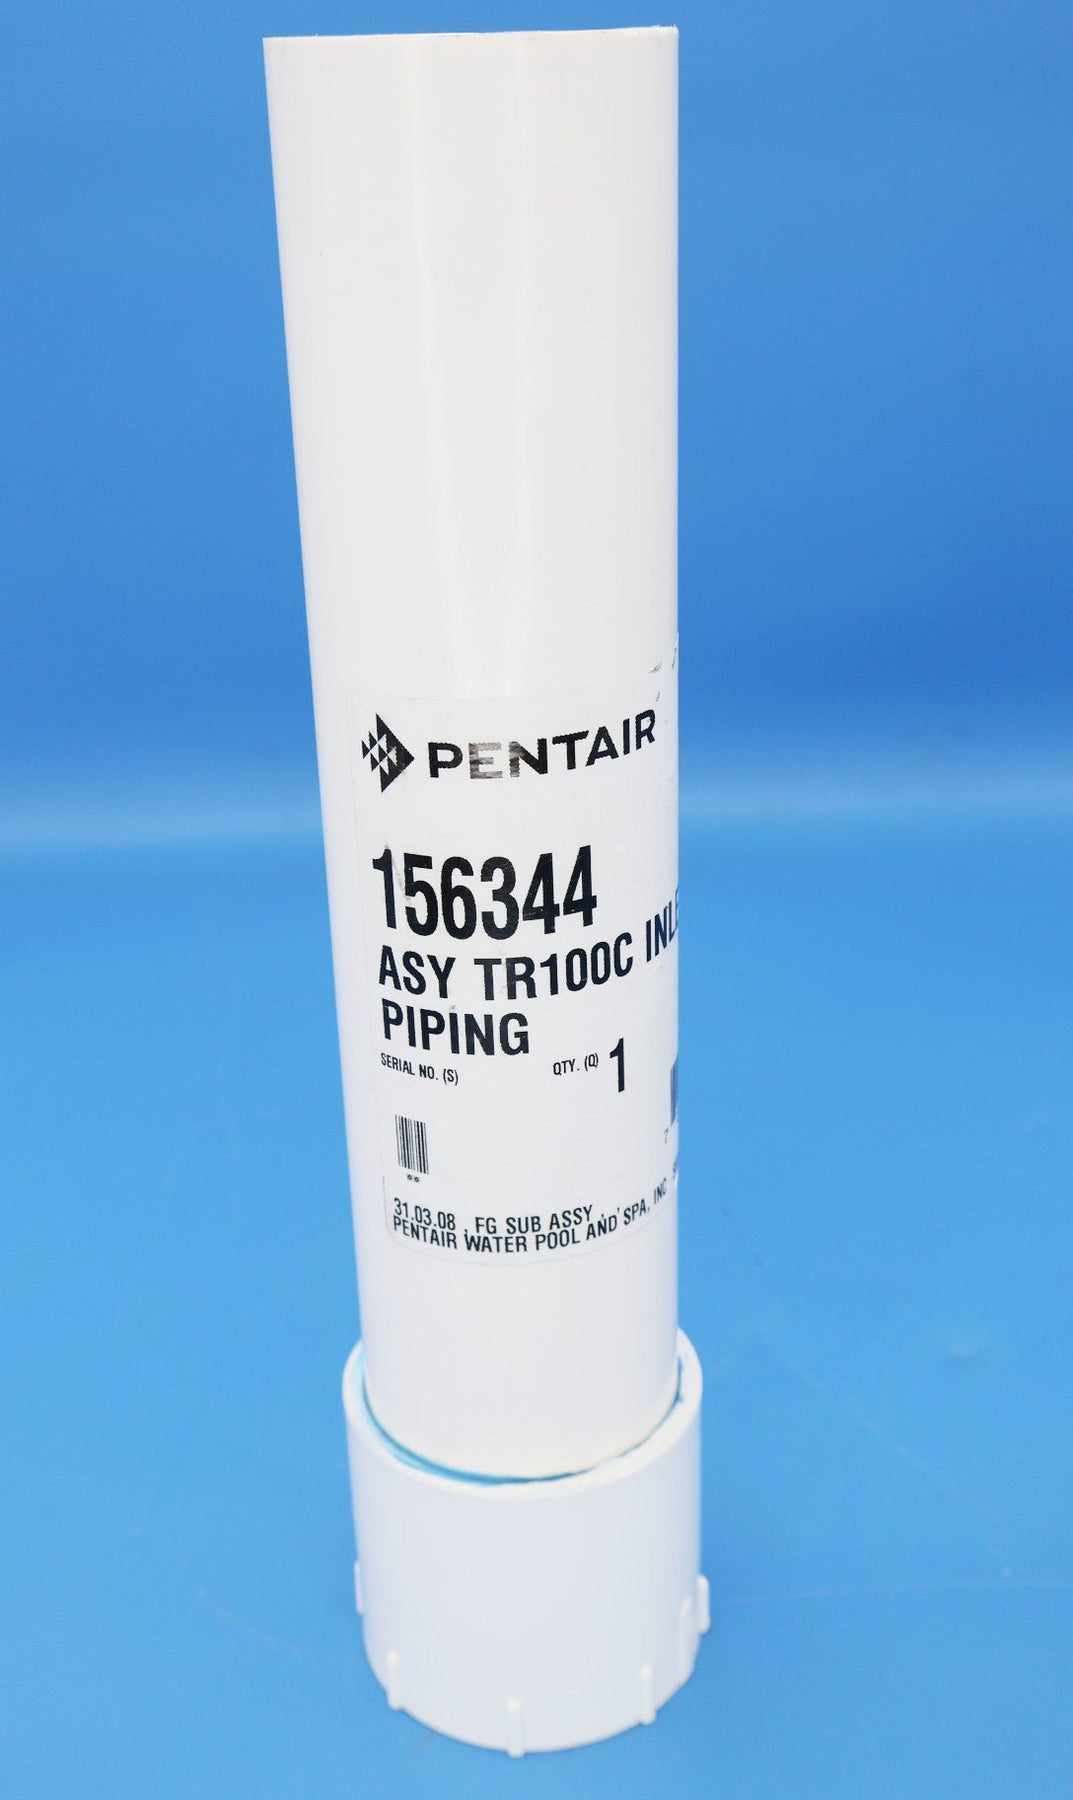 Pentair Triton C Upper Inlet Pipe Assembly 156344 - Pool Filter Parts - img-1